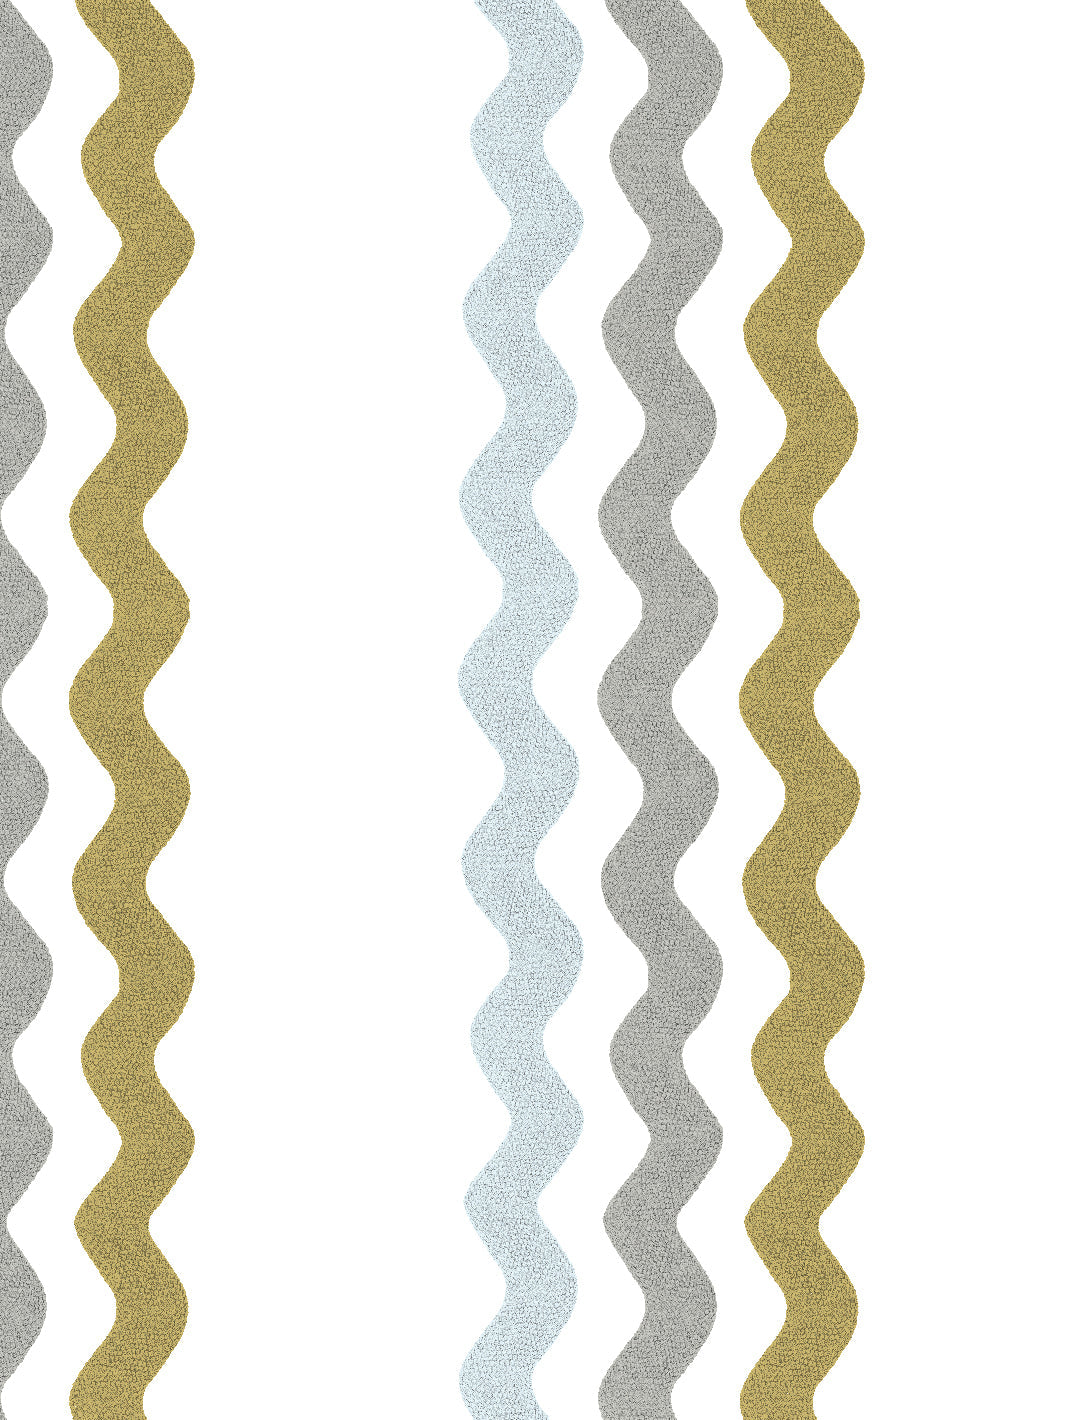 'Ric-Rac Bands' Wallpaper by Sarah Jessica Parker - Silver Metal Olive